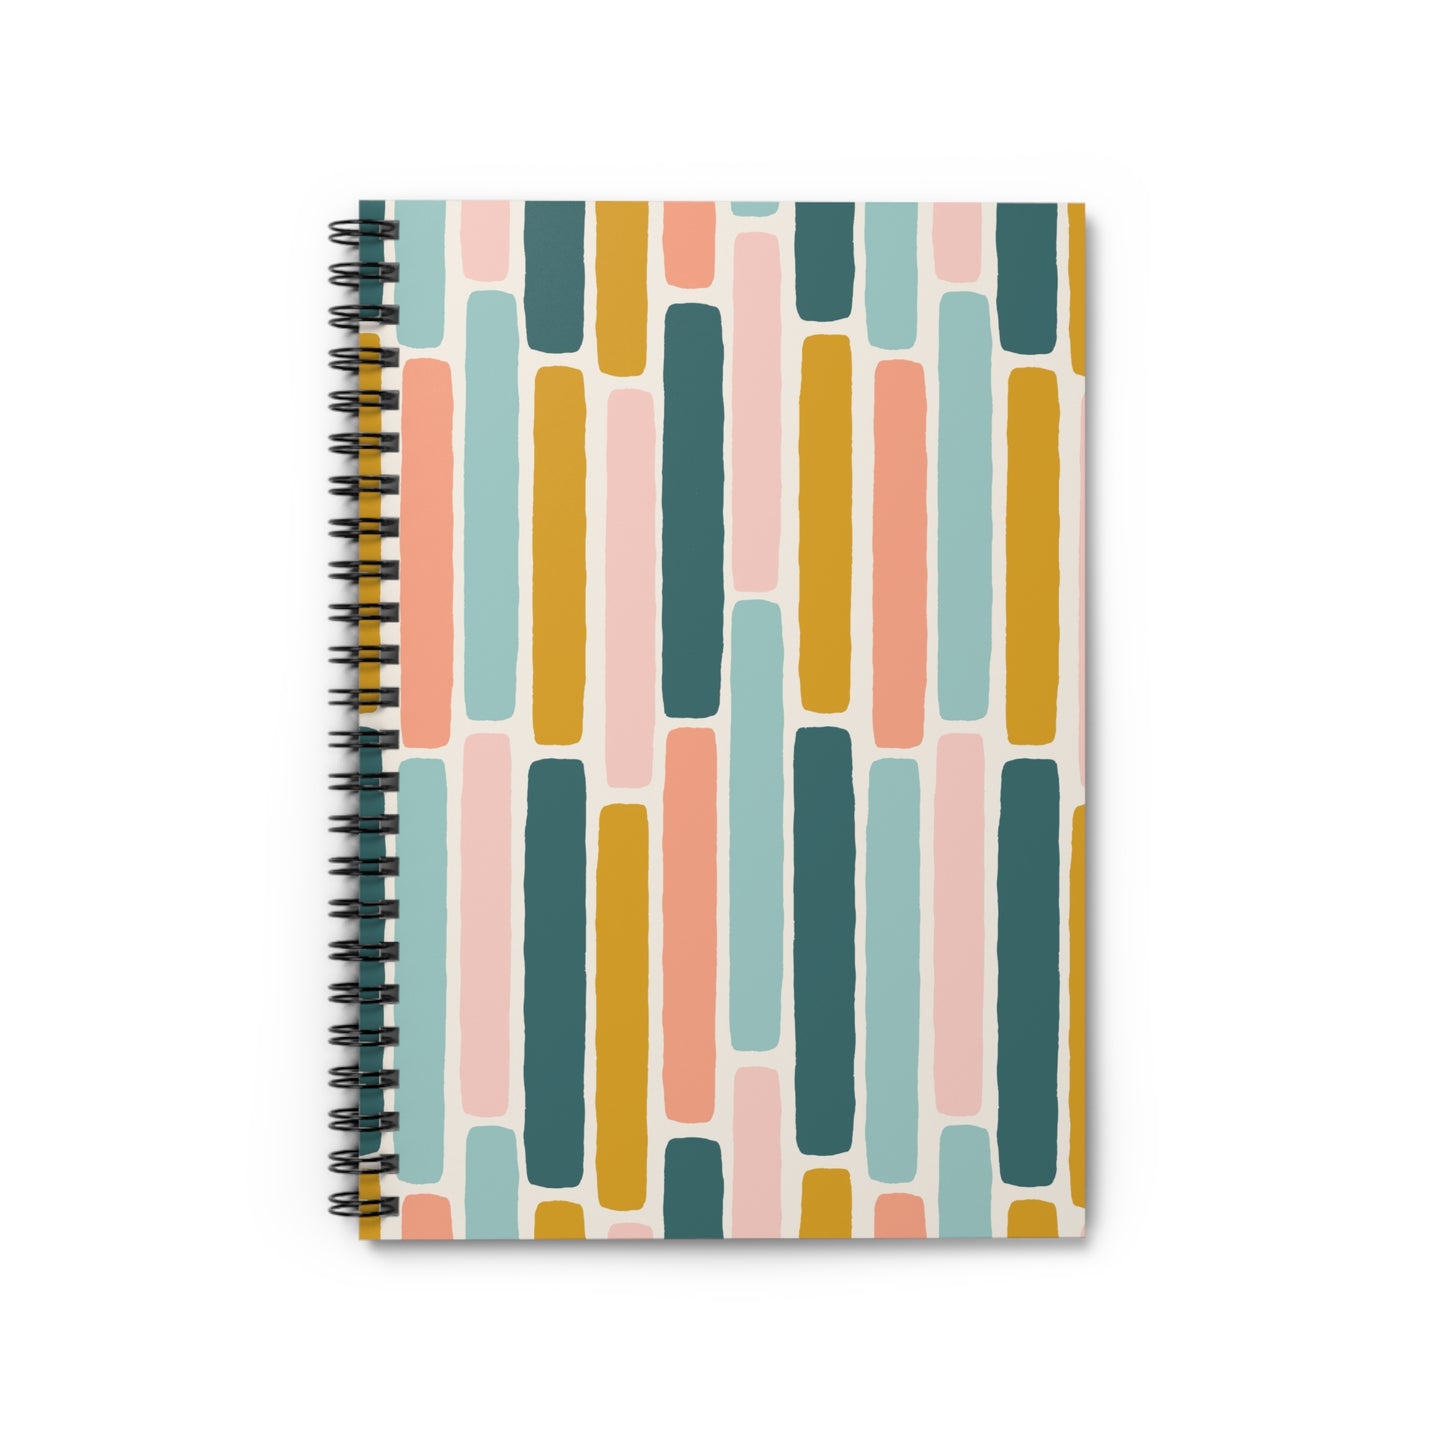 Spiral Notebook - Ruled Line, Watercolour Stripes